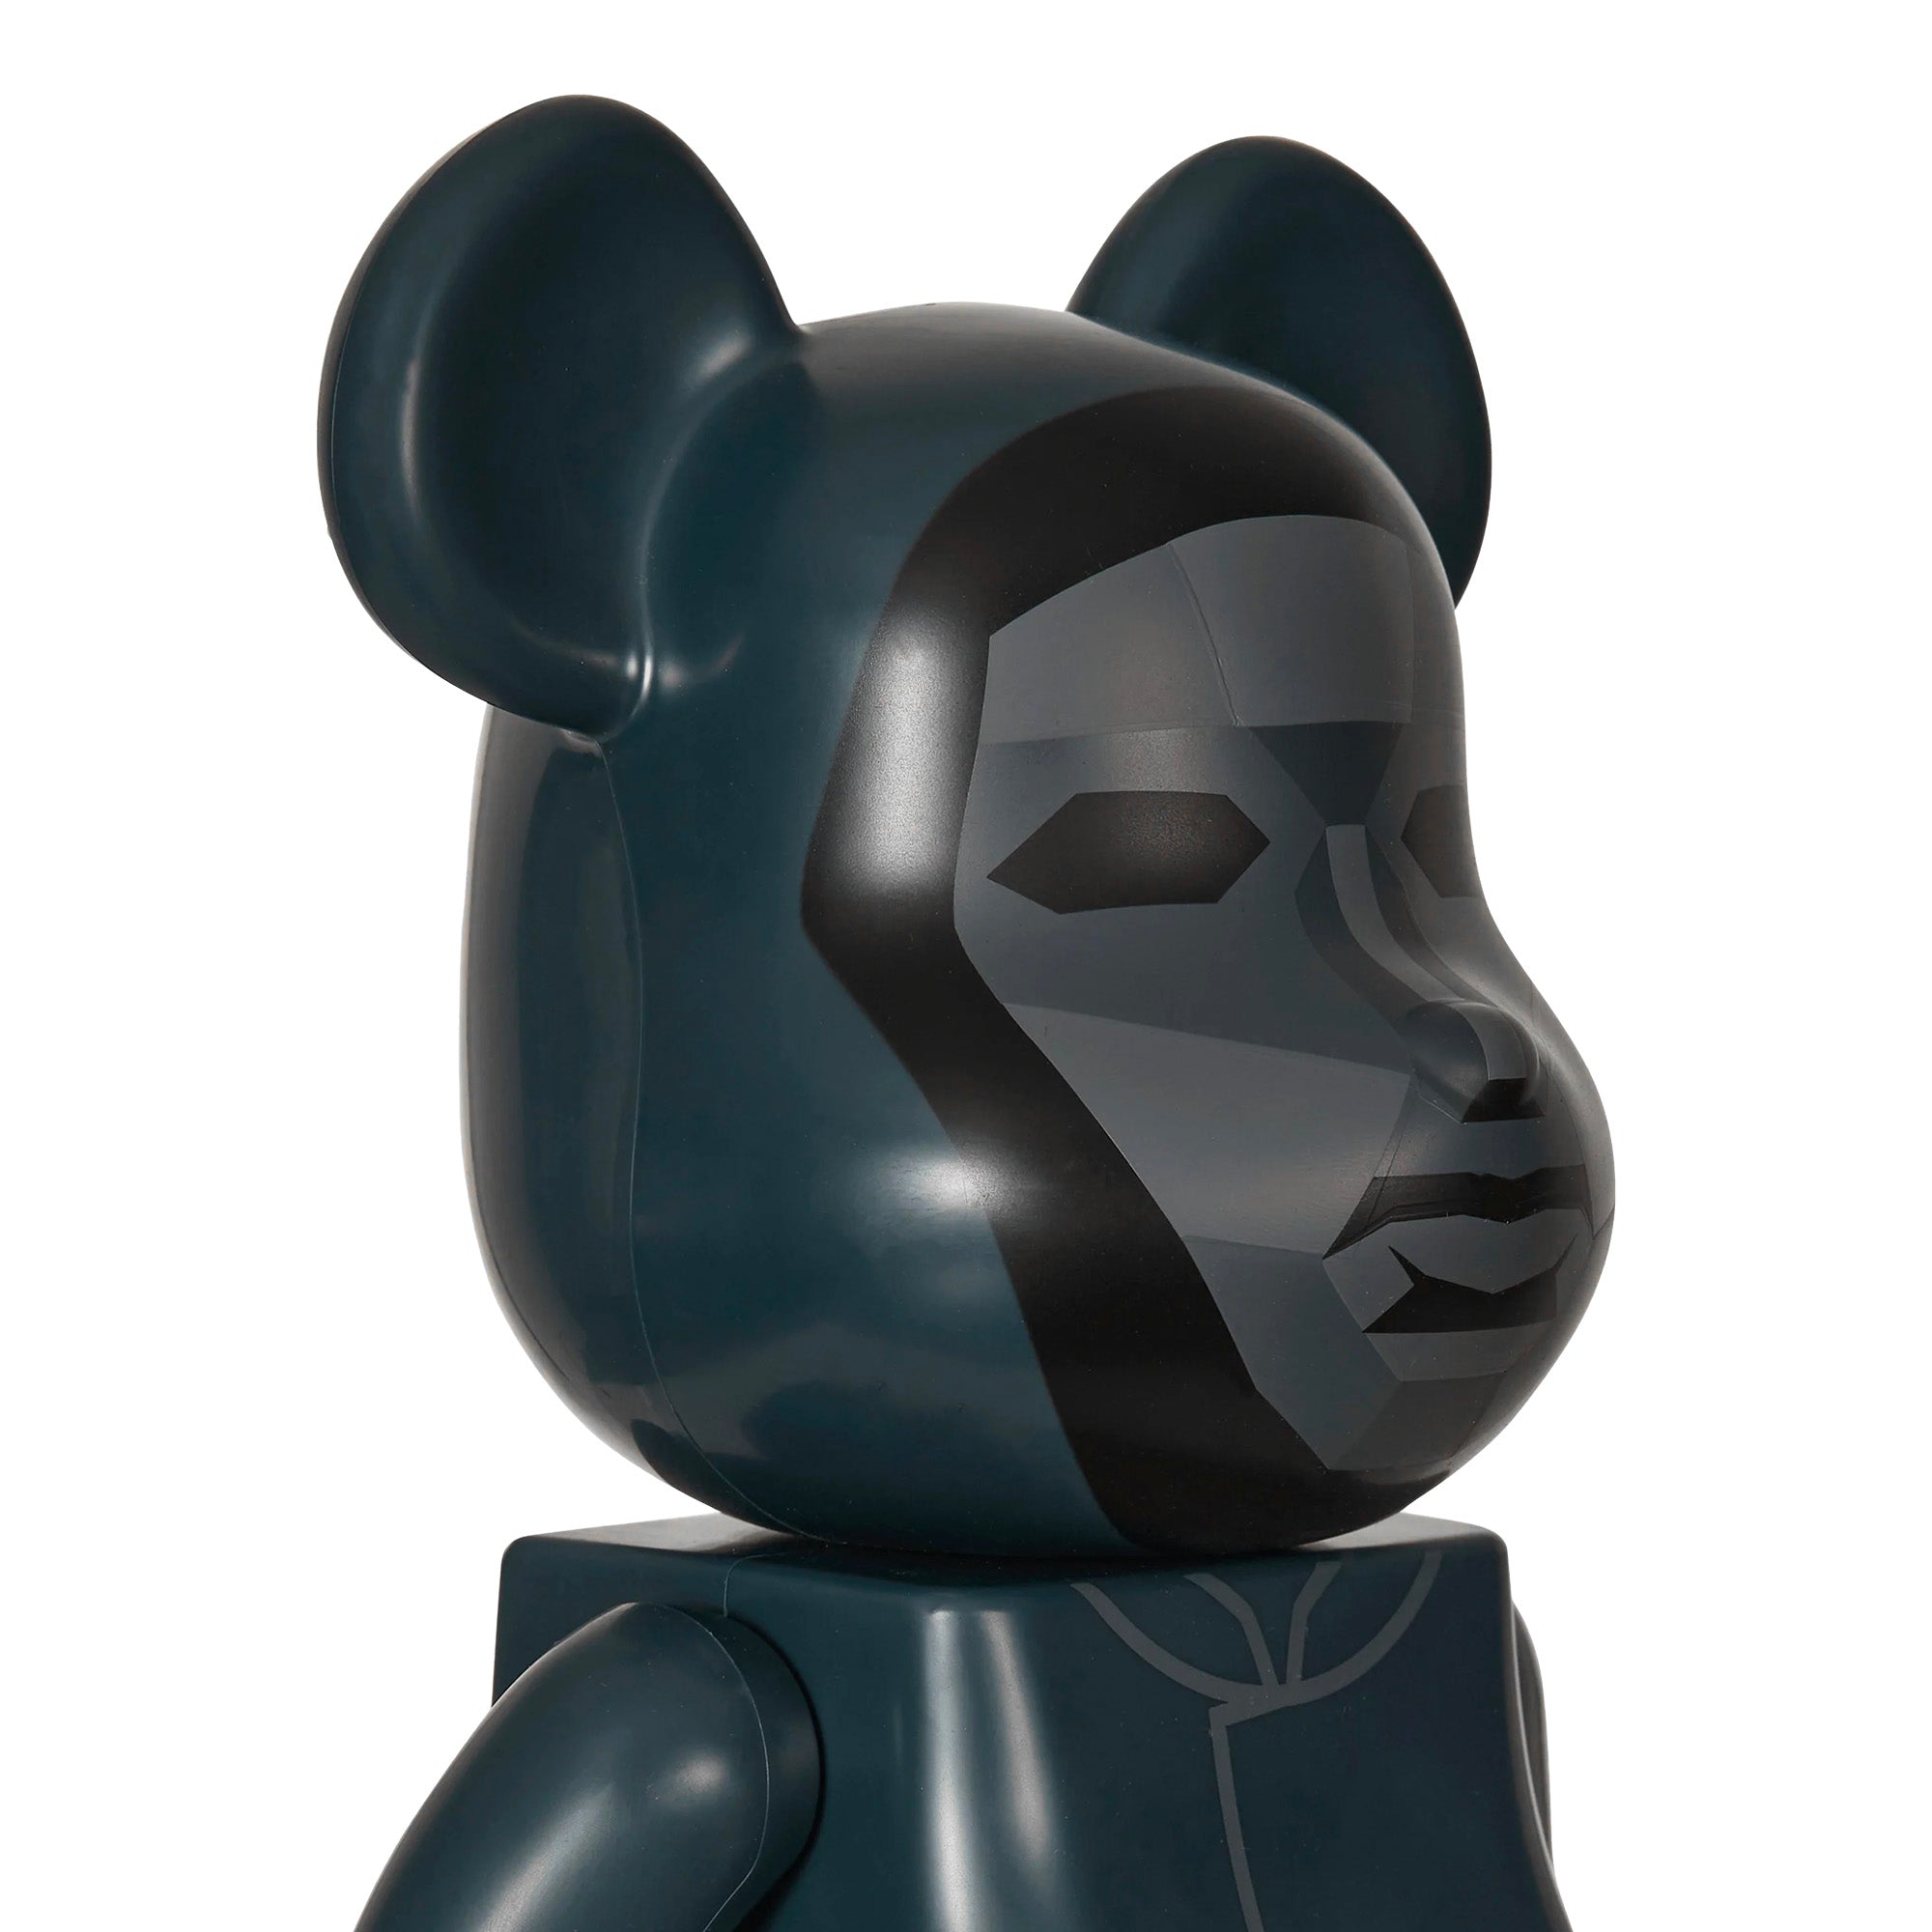 MEDICOM TOY: BE@RBRICK - Squid Game Front Man 100% & 400%